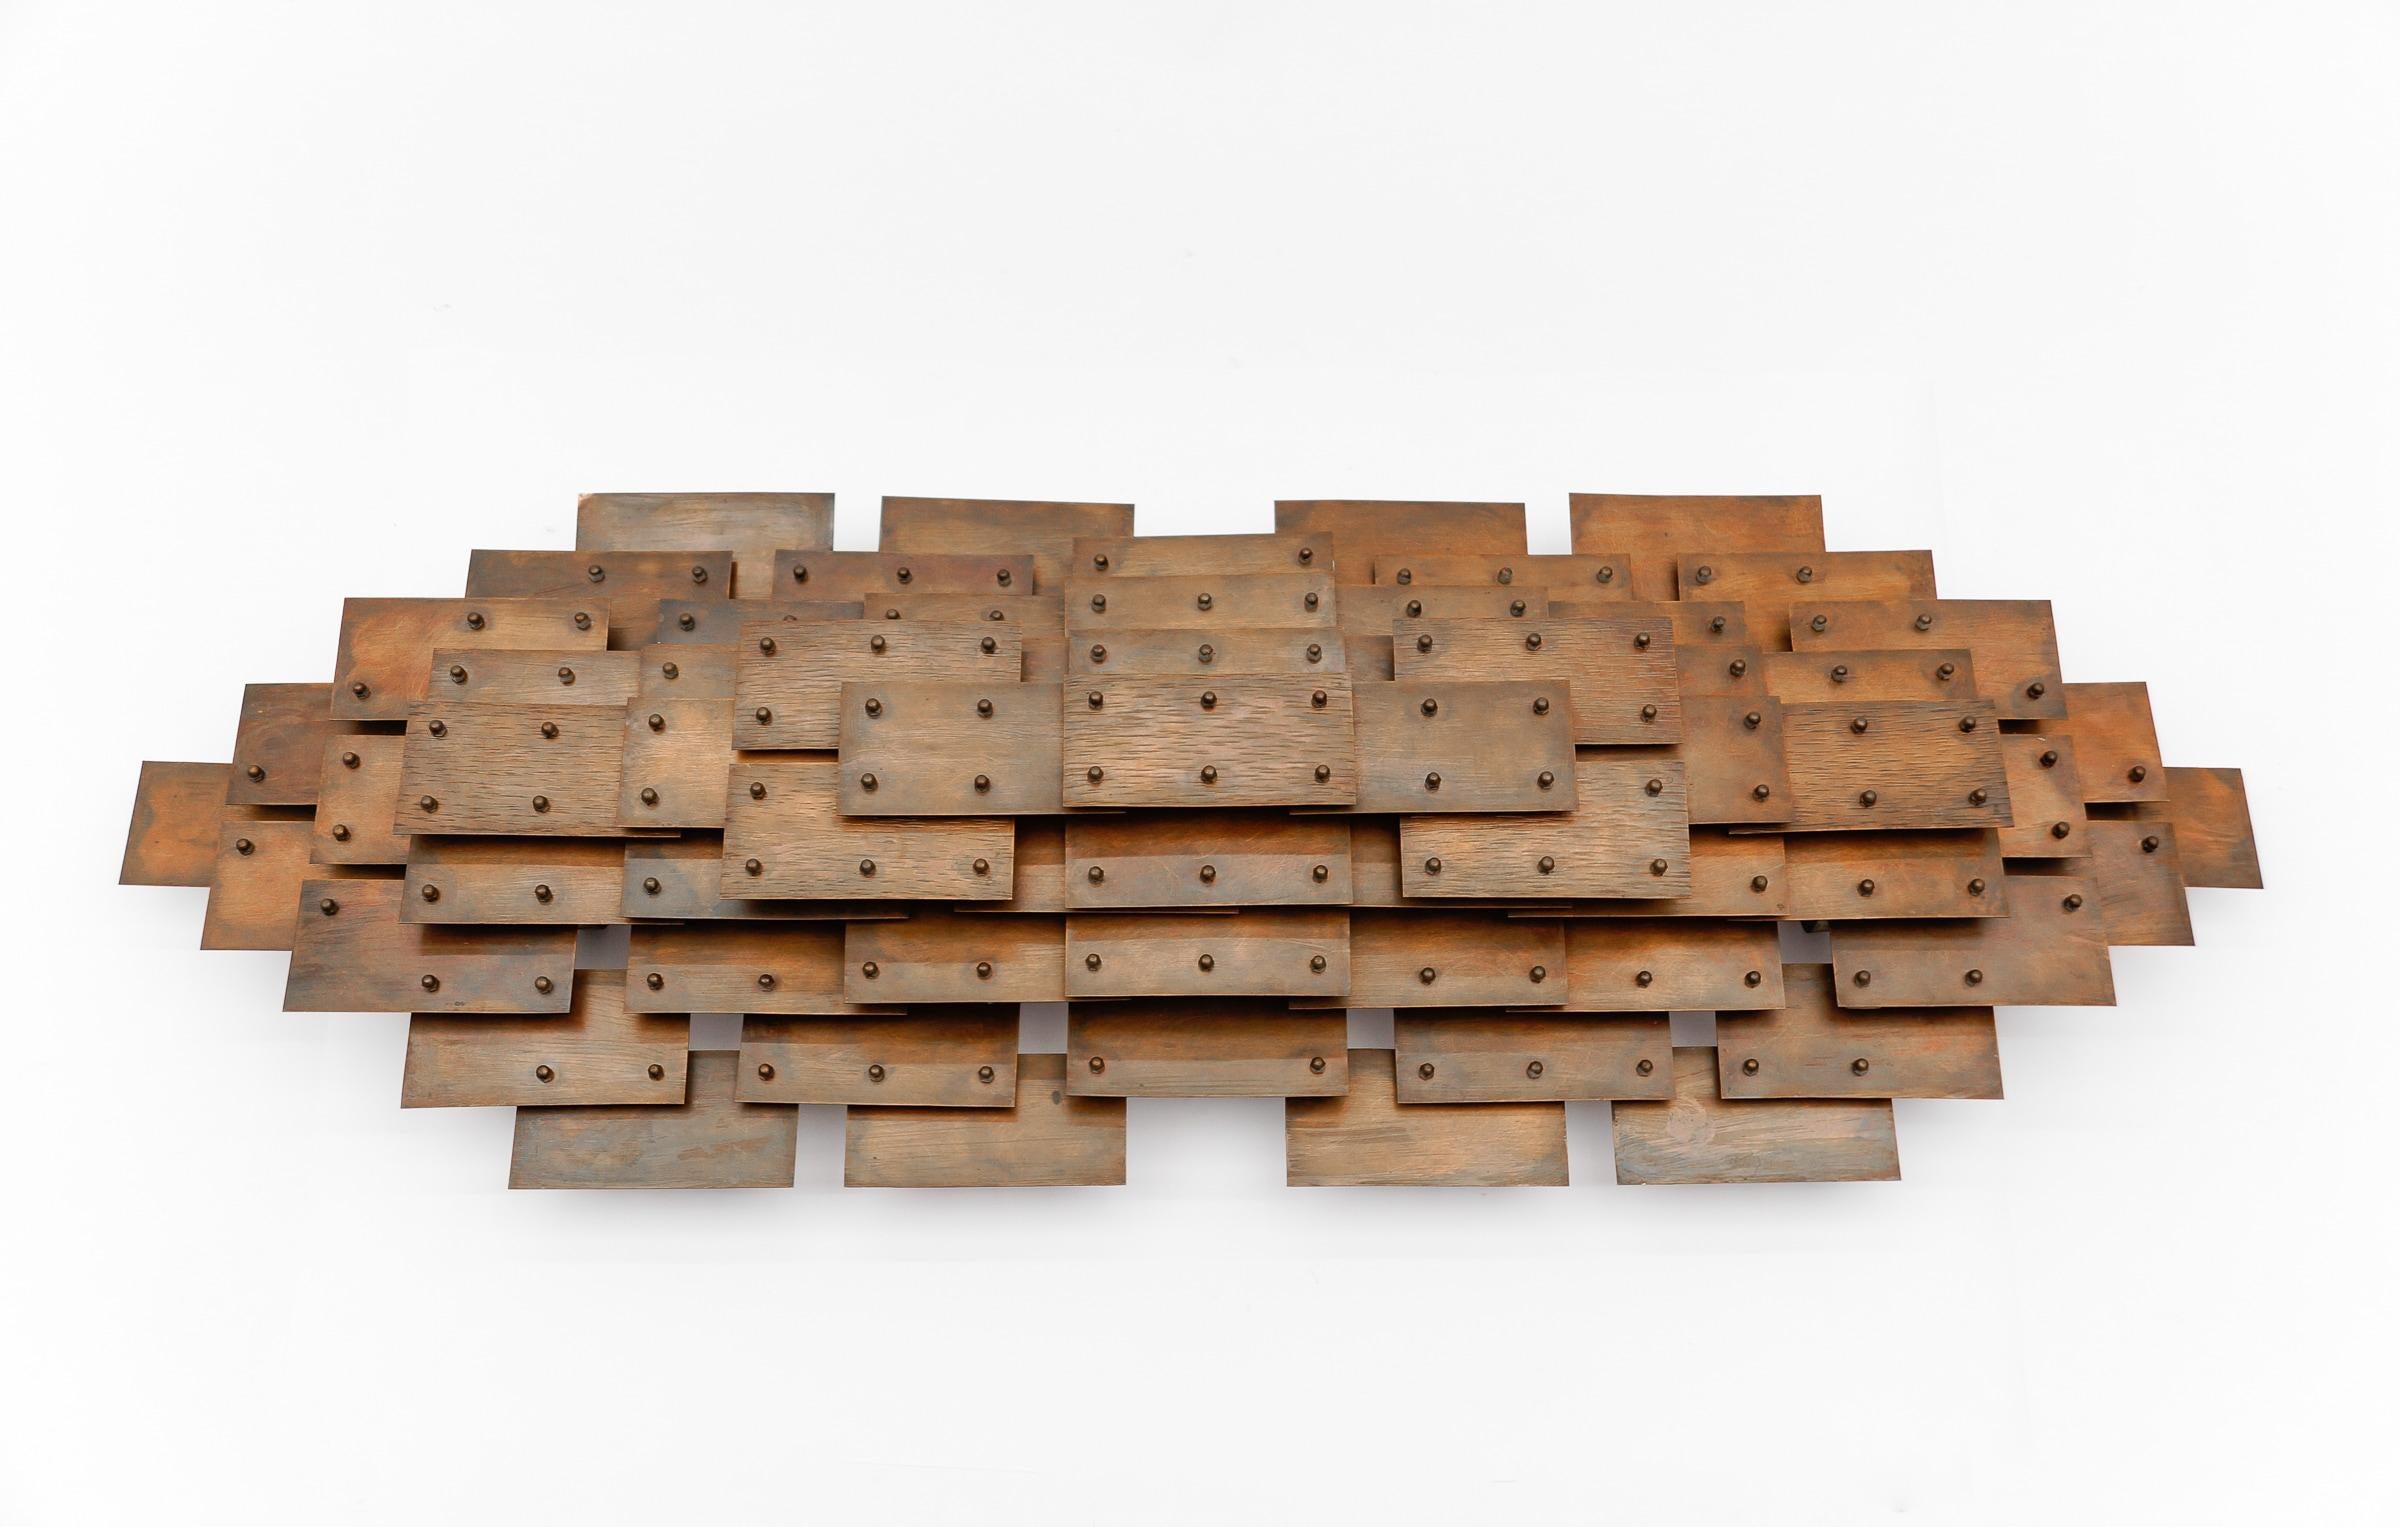 Brutalist Copper Wall Sculpture, 1960s Germany

Great part, makes an impressive impression. 

The individual copper plates are finished differently and are held in position at different levels with screws of different lengths.

The rear plates have